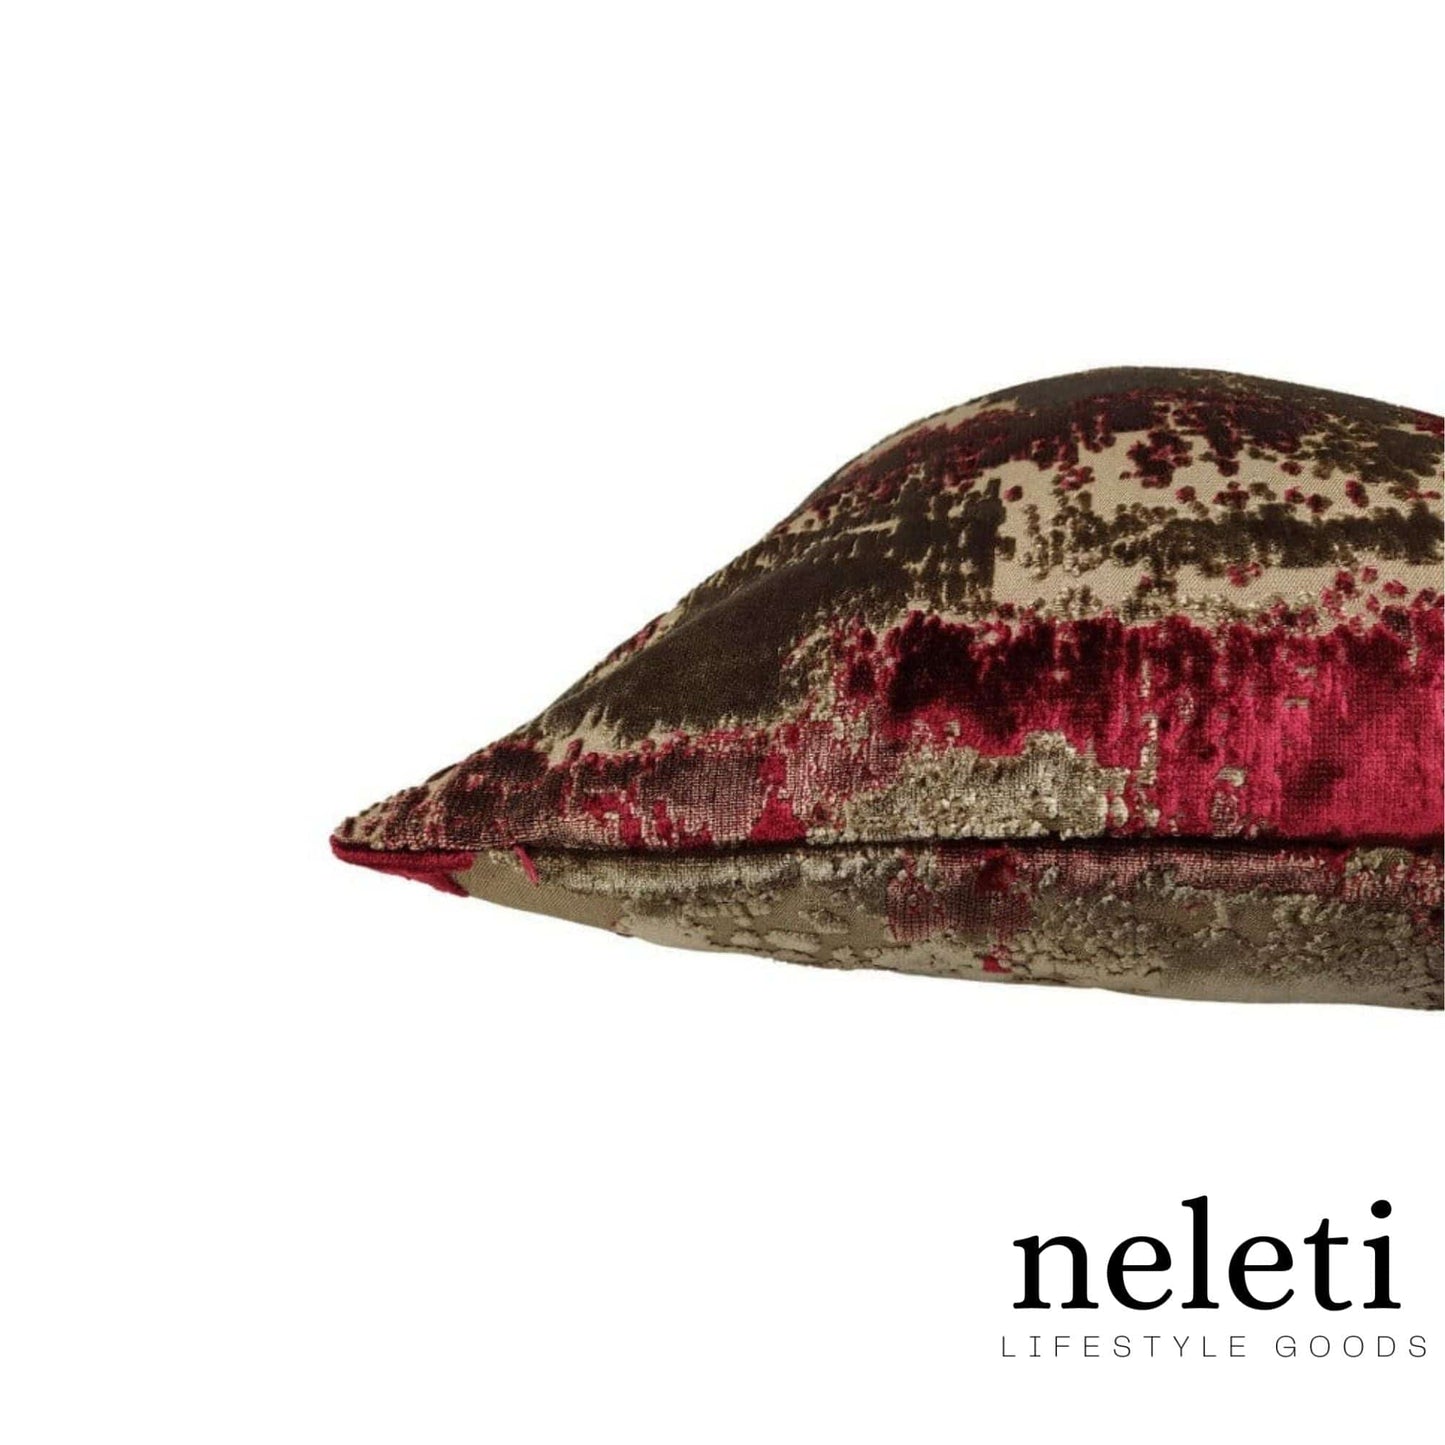 neleti.com-red-gold-accent-pillow-cover